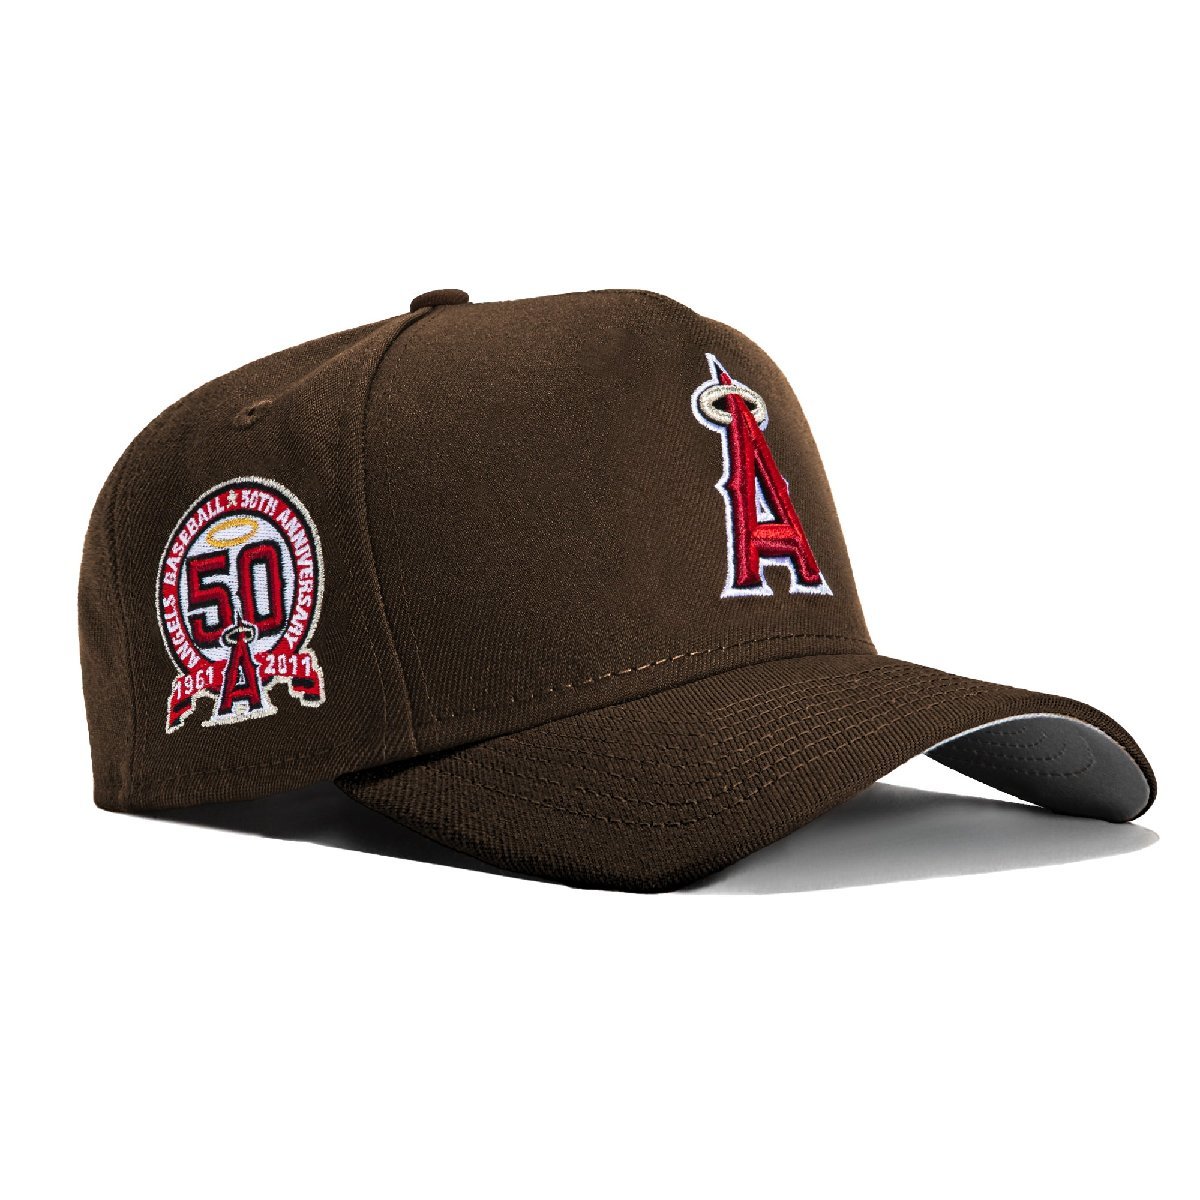 NEW ERA ニューエラ キャップ ロサンゼルス エンゼルス MLB 9FORTY A-FRAME LOS ANGELES ANGELS 50TH ANNIVERSARY PATCH SNAPBACK BROWN